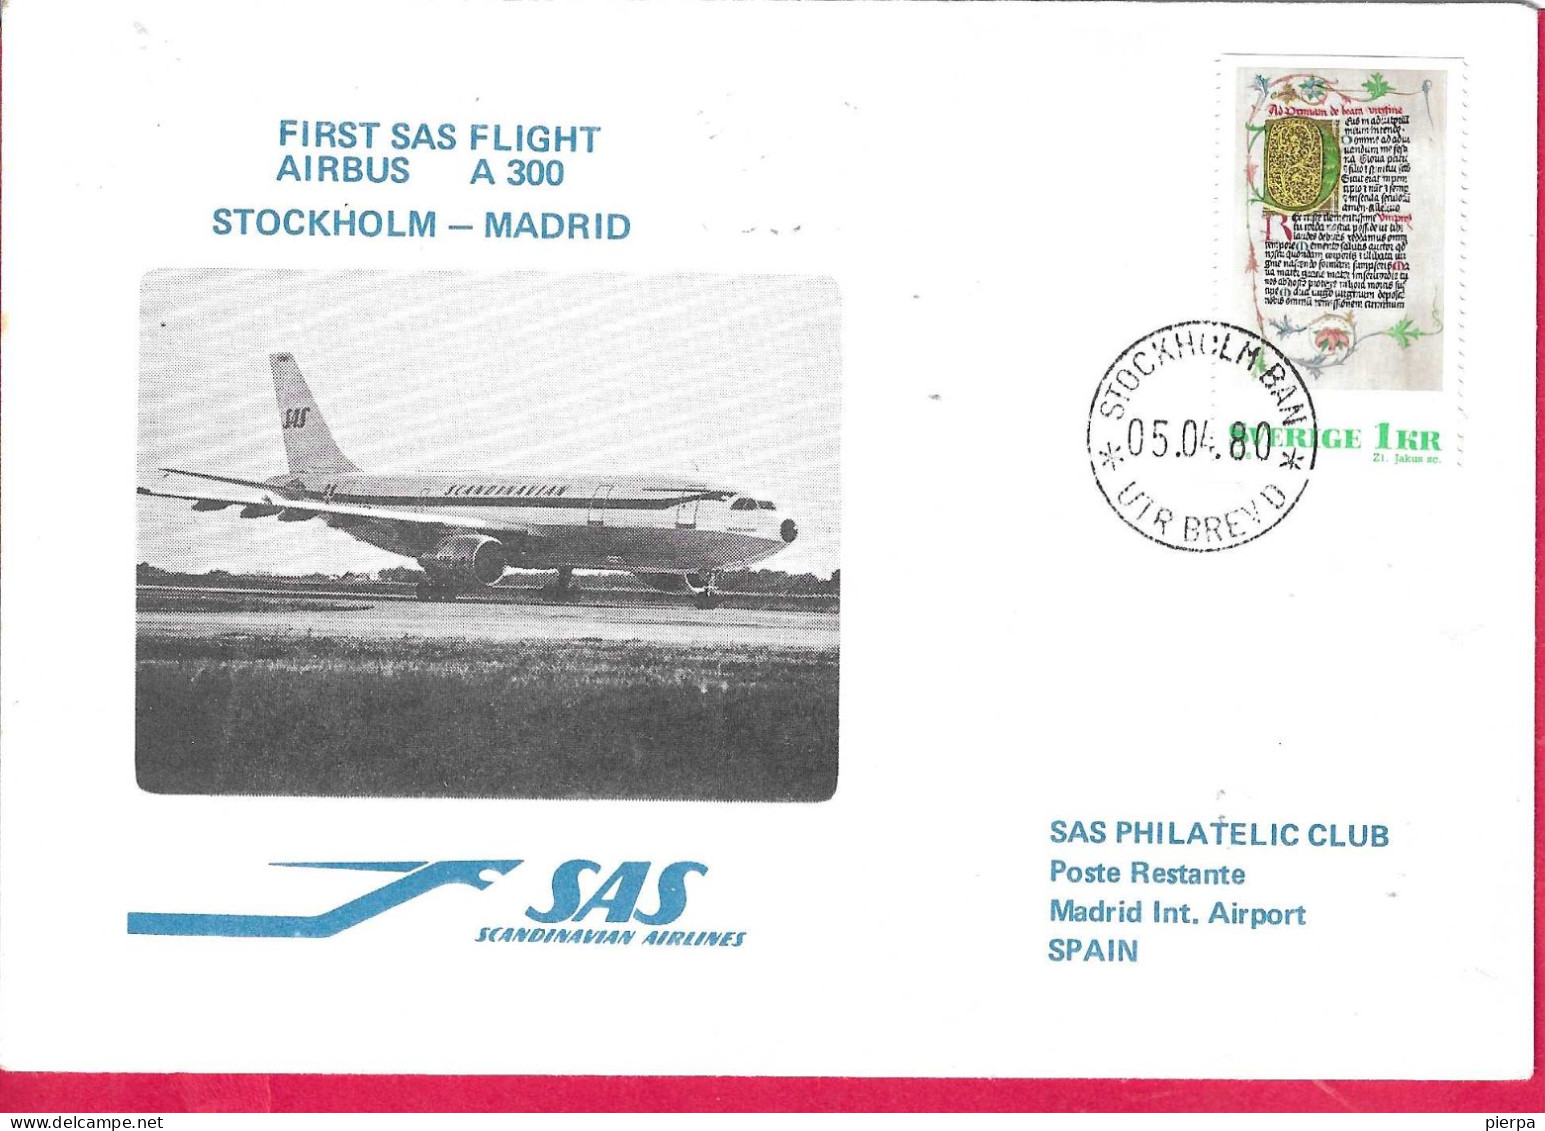 SVERIGE - FIRST SAS FLIGHT AIRBUS A 300 FROM STOCKHOLM TO MADRID * 05.04.80* ON OFFICIAL LARGE SIZE  ENVELOPE - Lettres & Documents